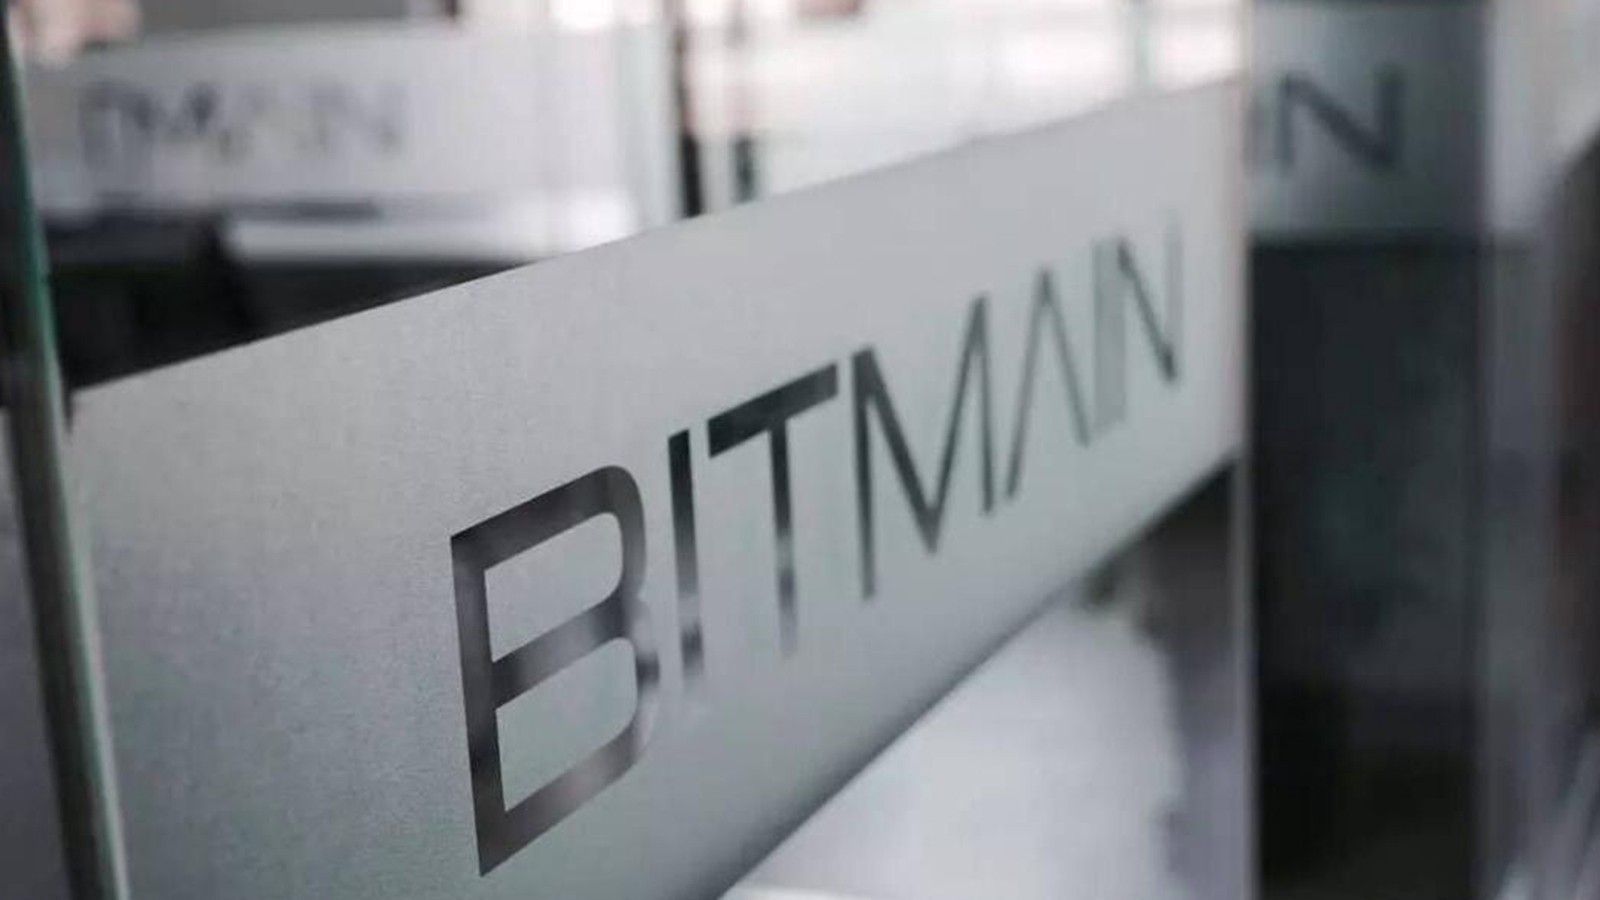 BITMAIN HAS LAUNCHED A CRYPTOCURRENCY INDEX